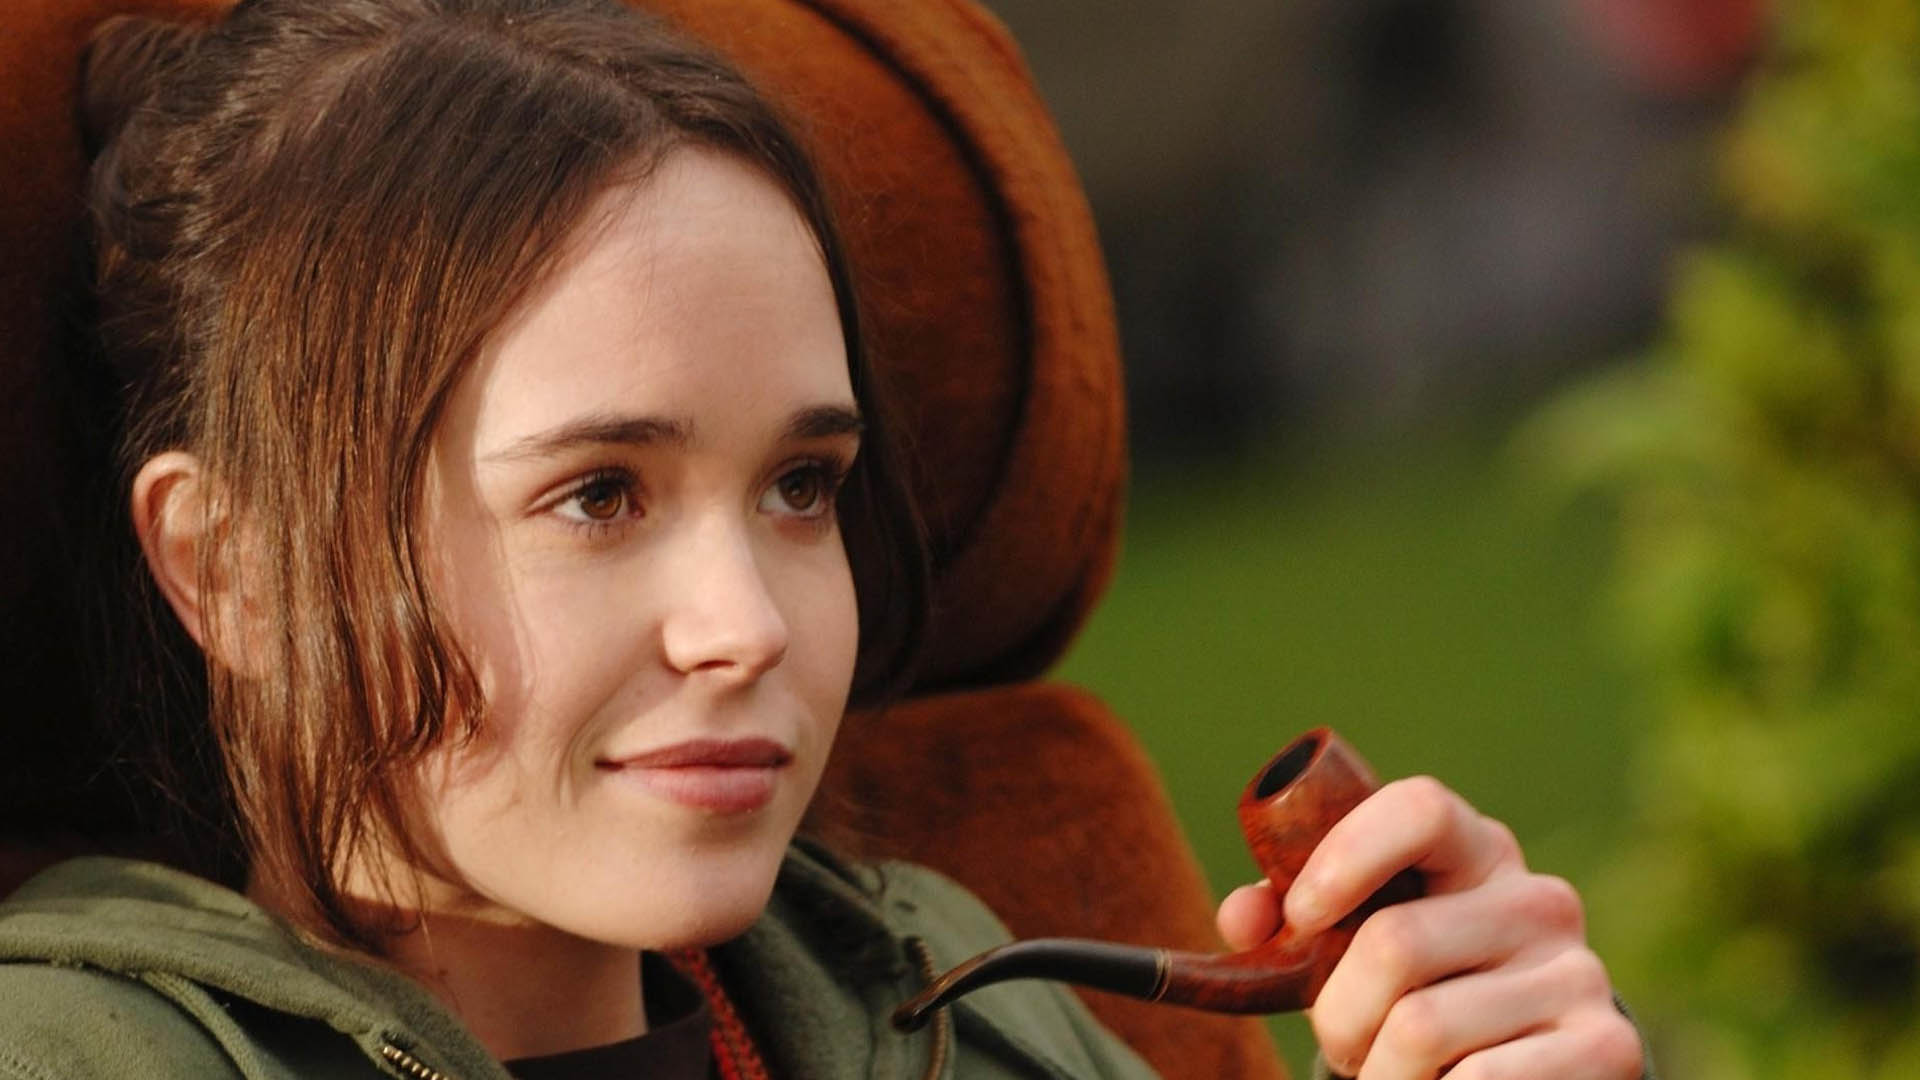 Ellen Page is pulling a pipe in the movie Juno